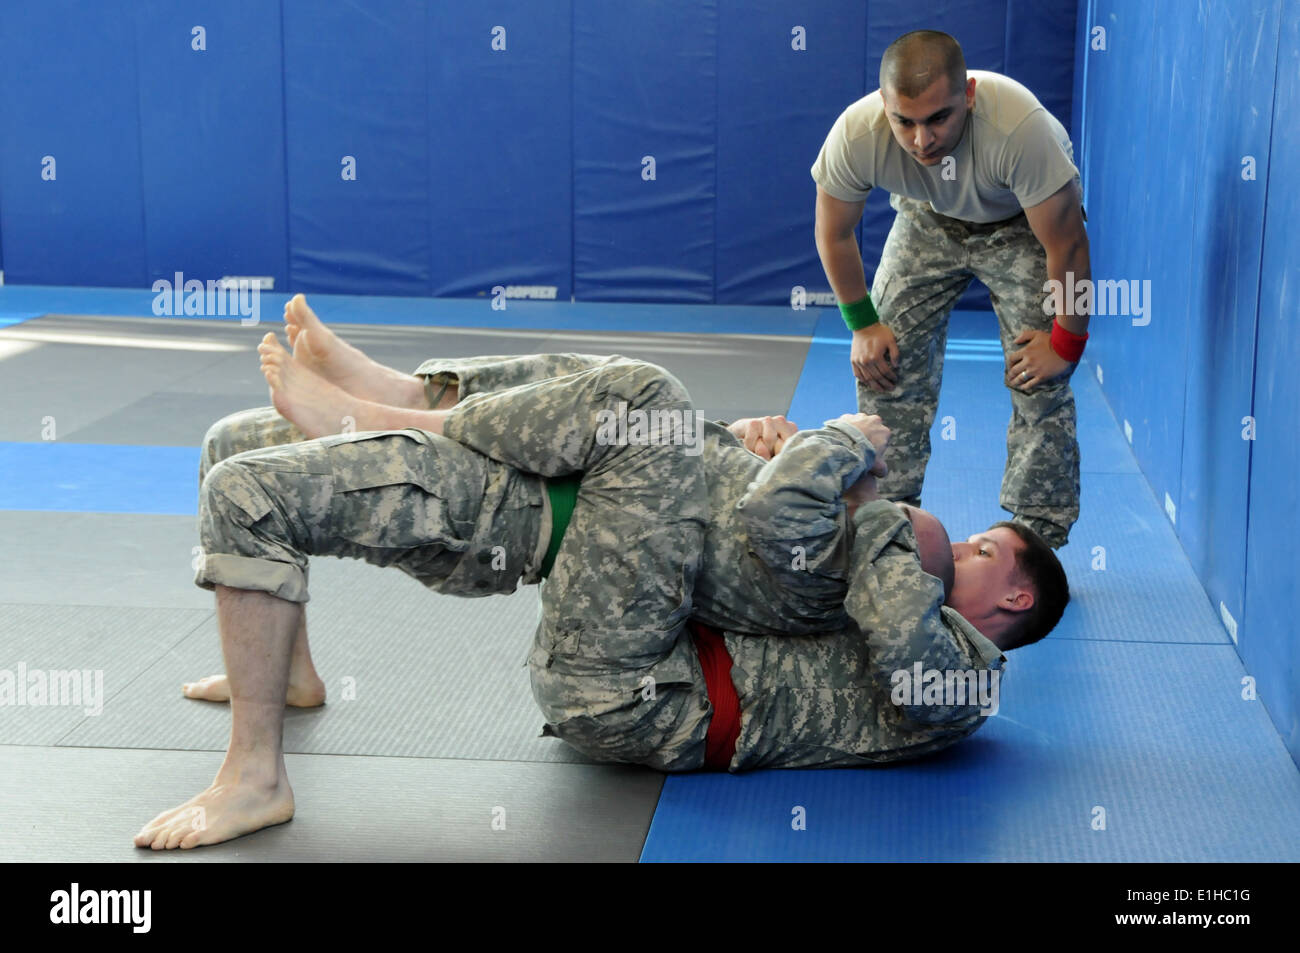 U.S. Army Staff Sgt. Brian Barnard and Spc. Jonathan Ellis compete in a combatives tournament on the first day of the Installat Stock Photo